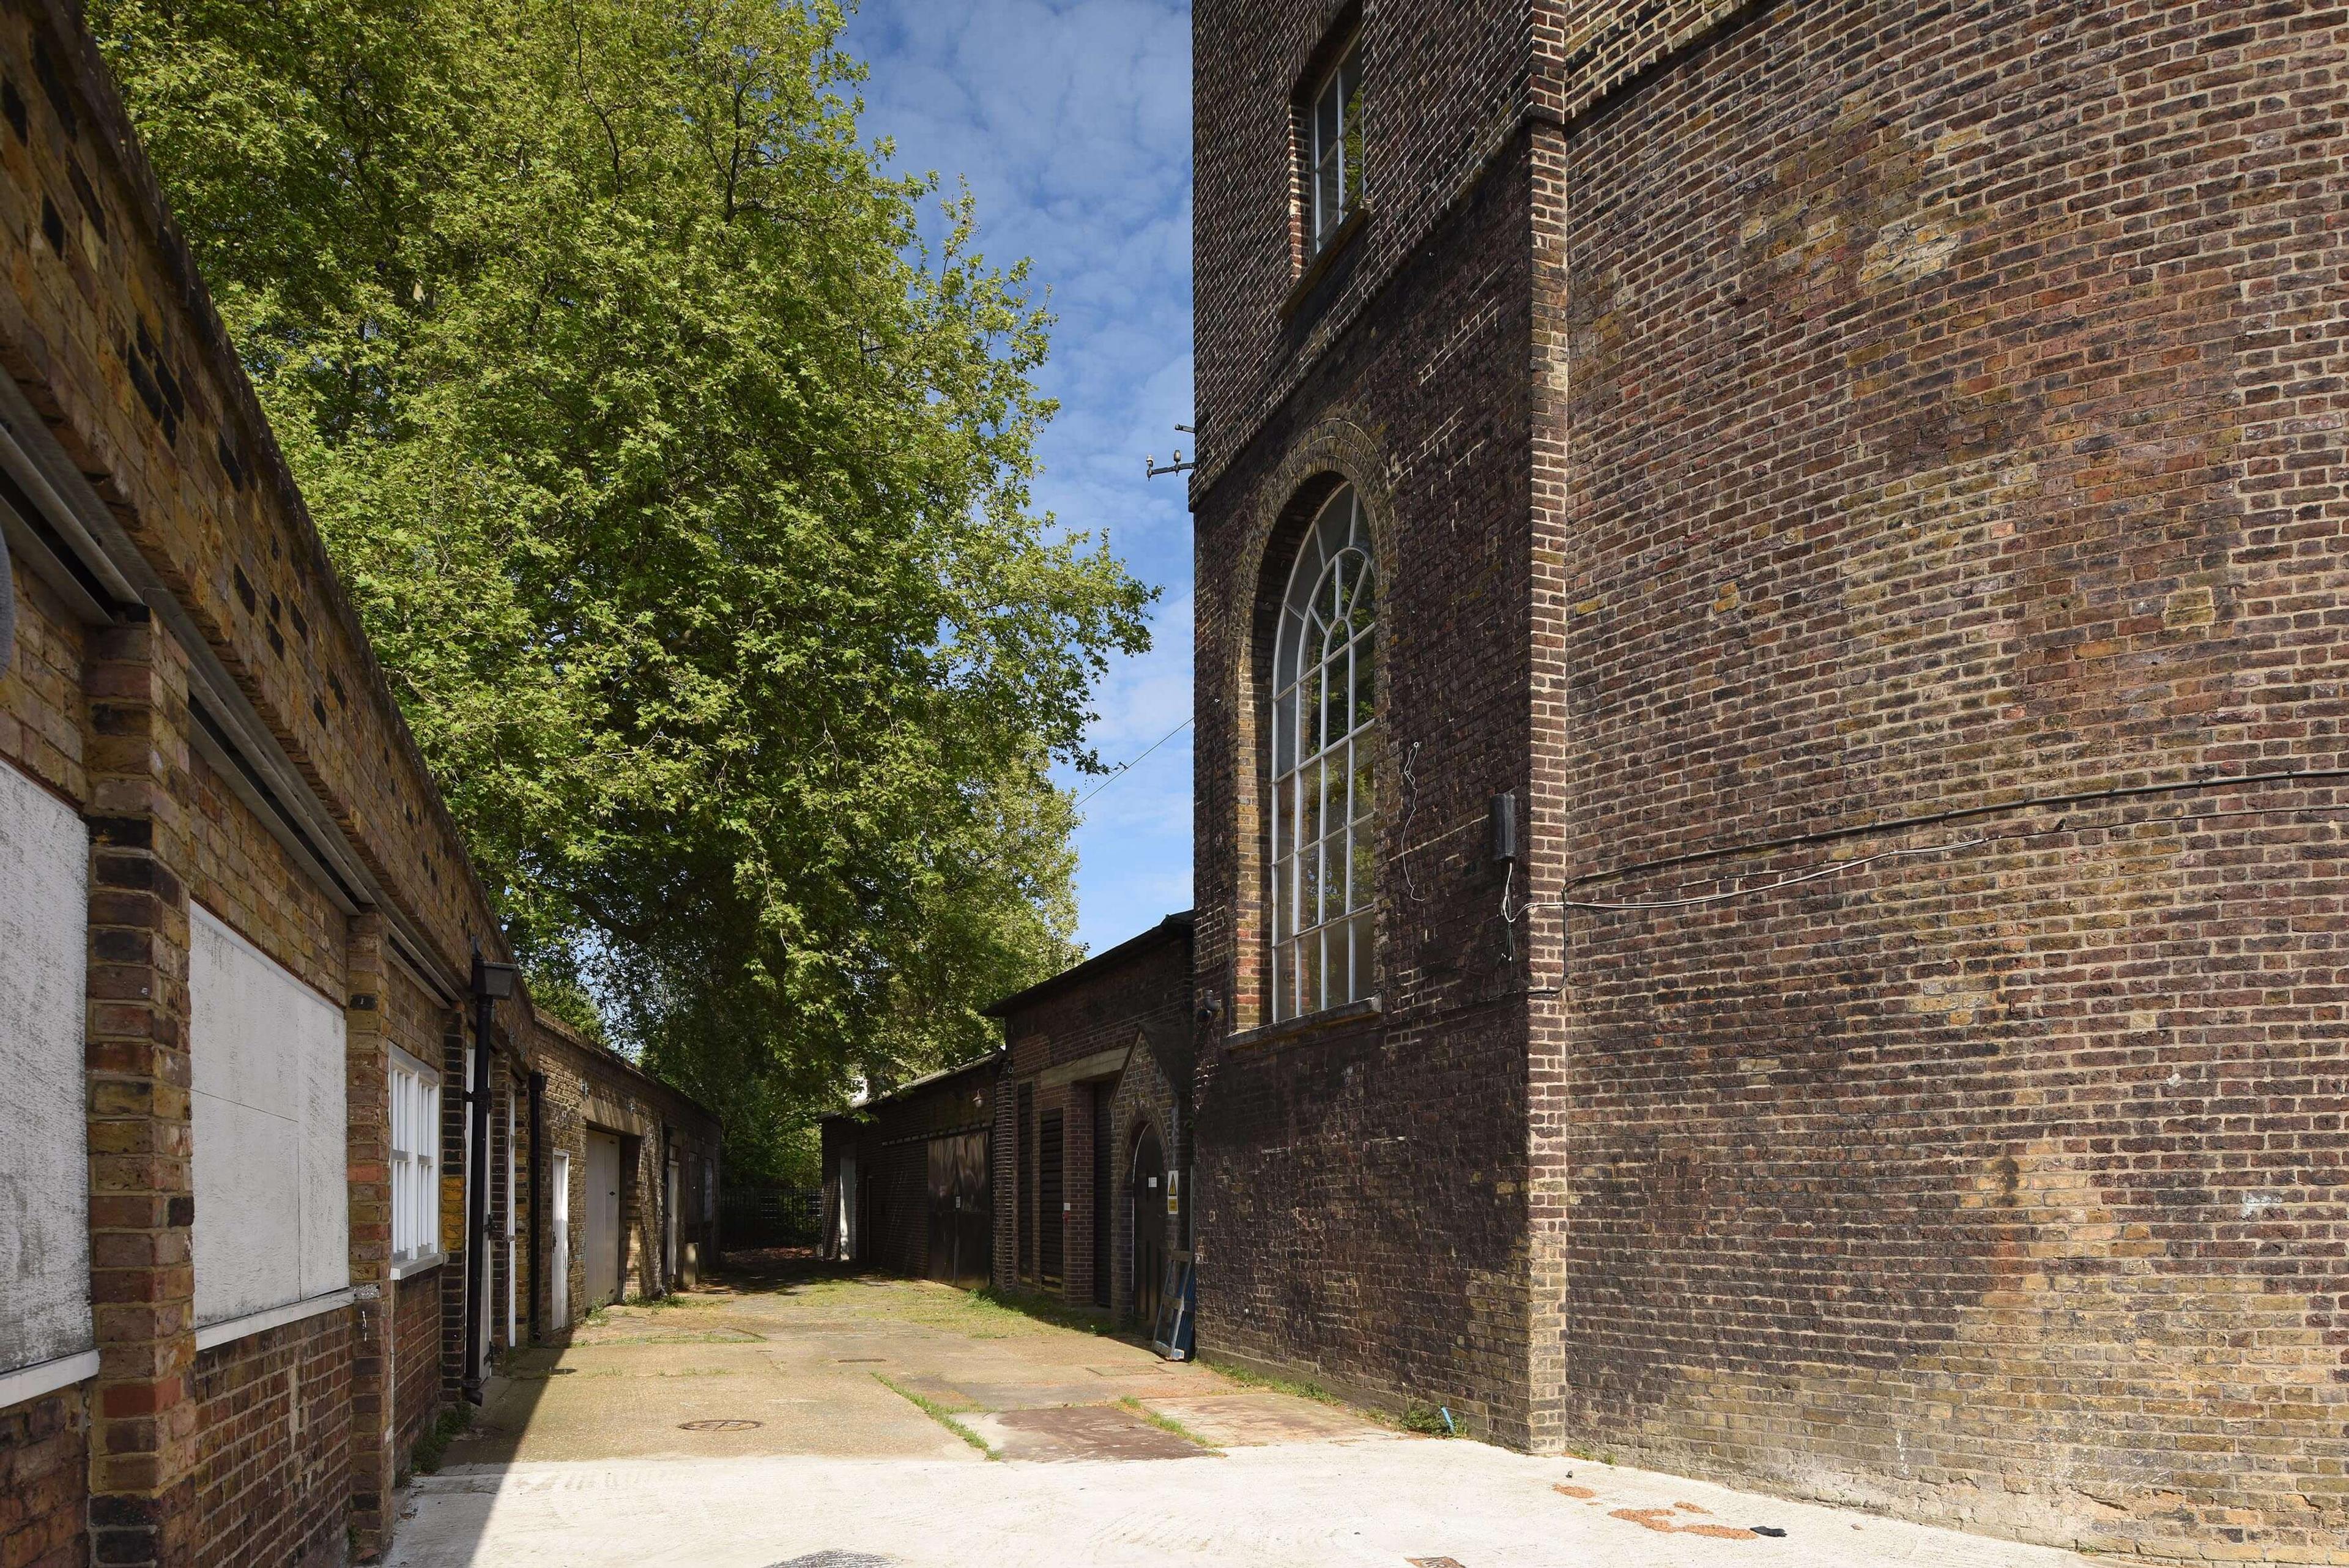 A cobbled path surrounded by brick buildings.